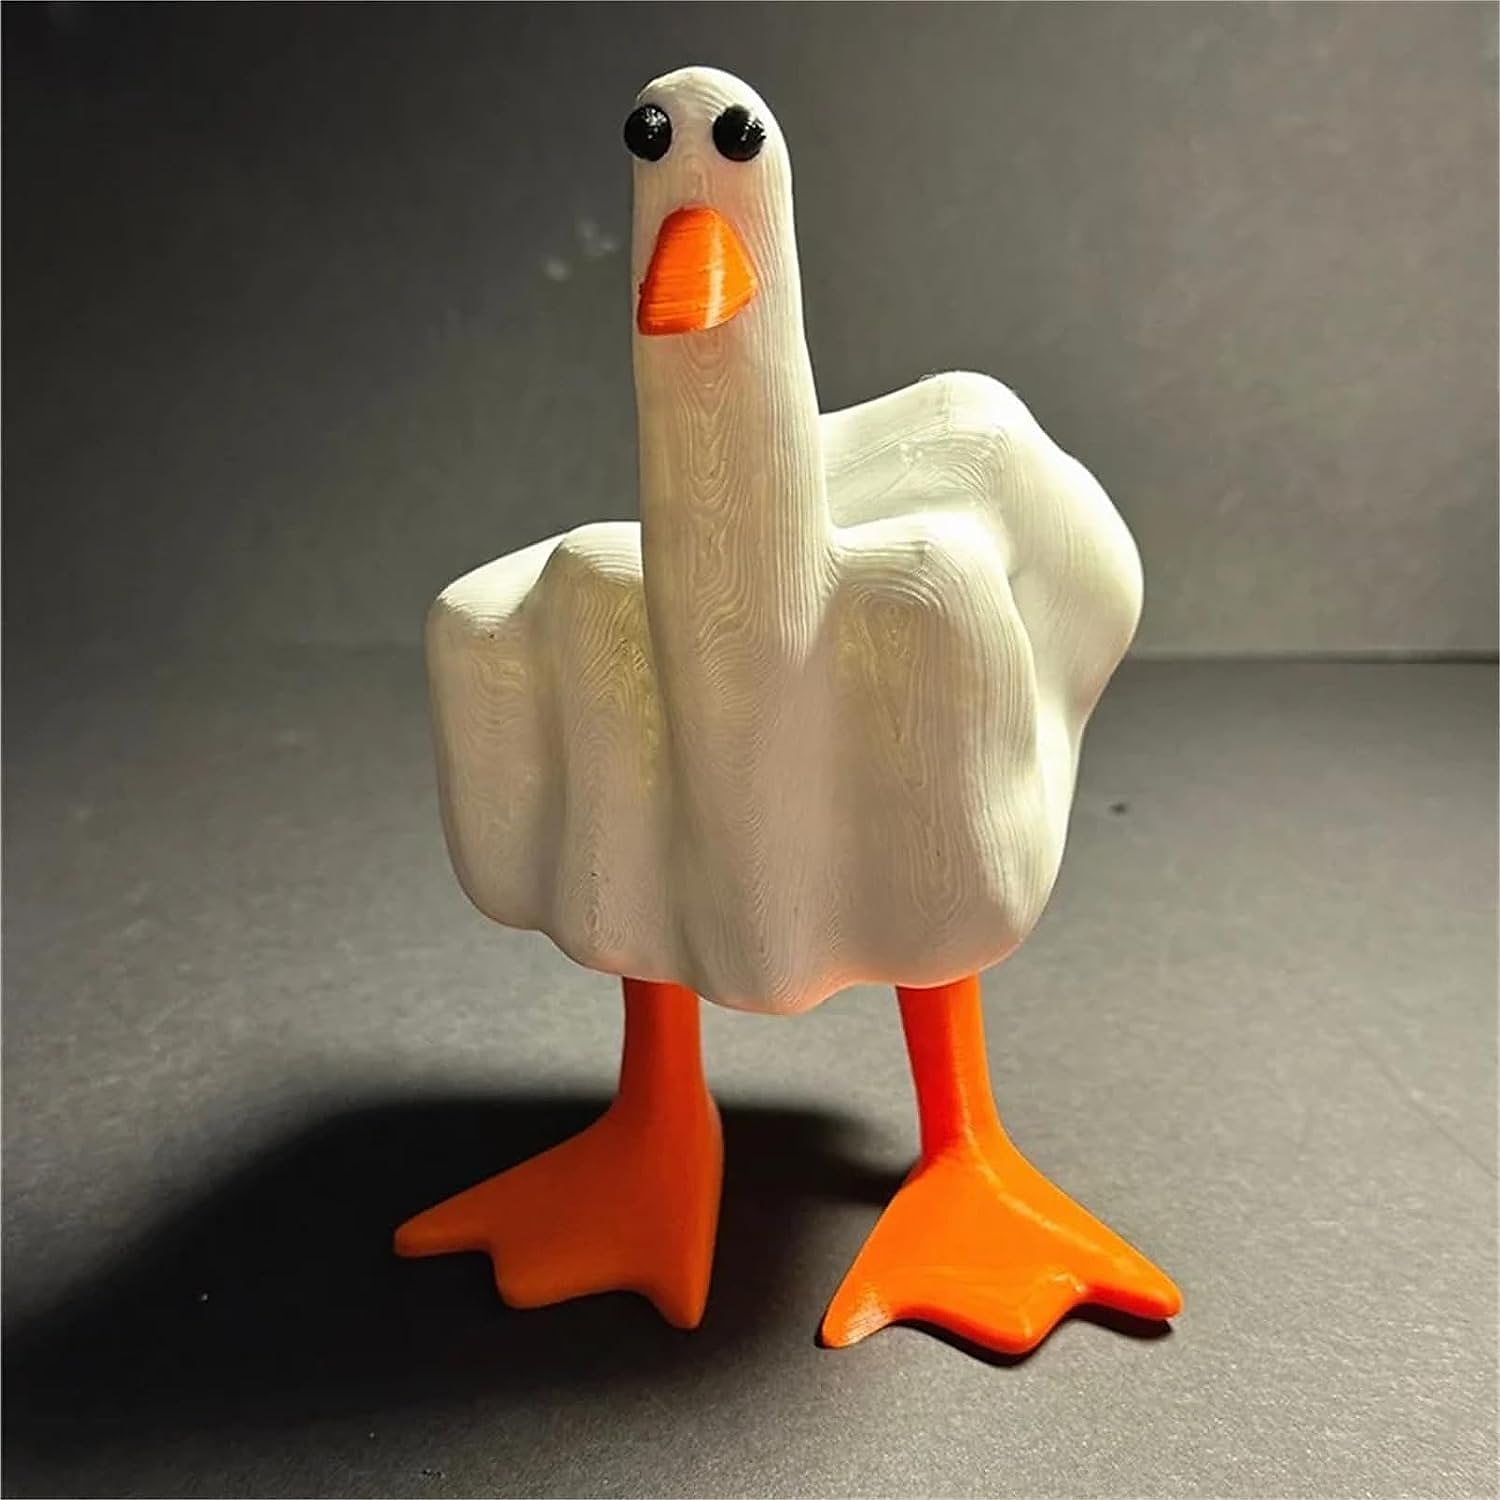 New Duck You Refers To The Cartoon Duck Resin Crafts Garden Sculpture Decoration Design Micro-Landscape 2023 - GBP £9 –P2